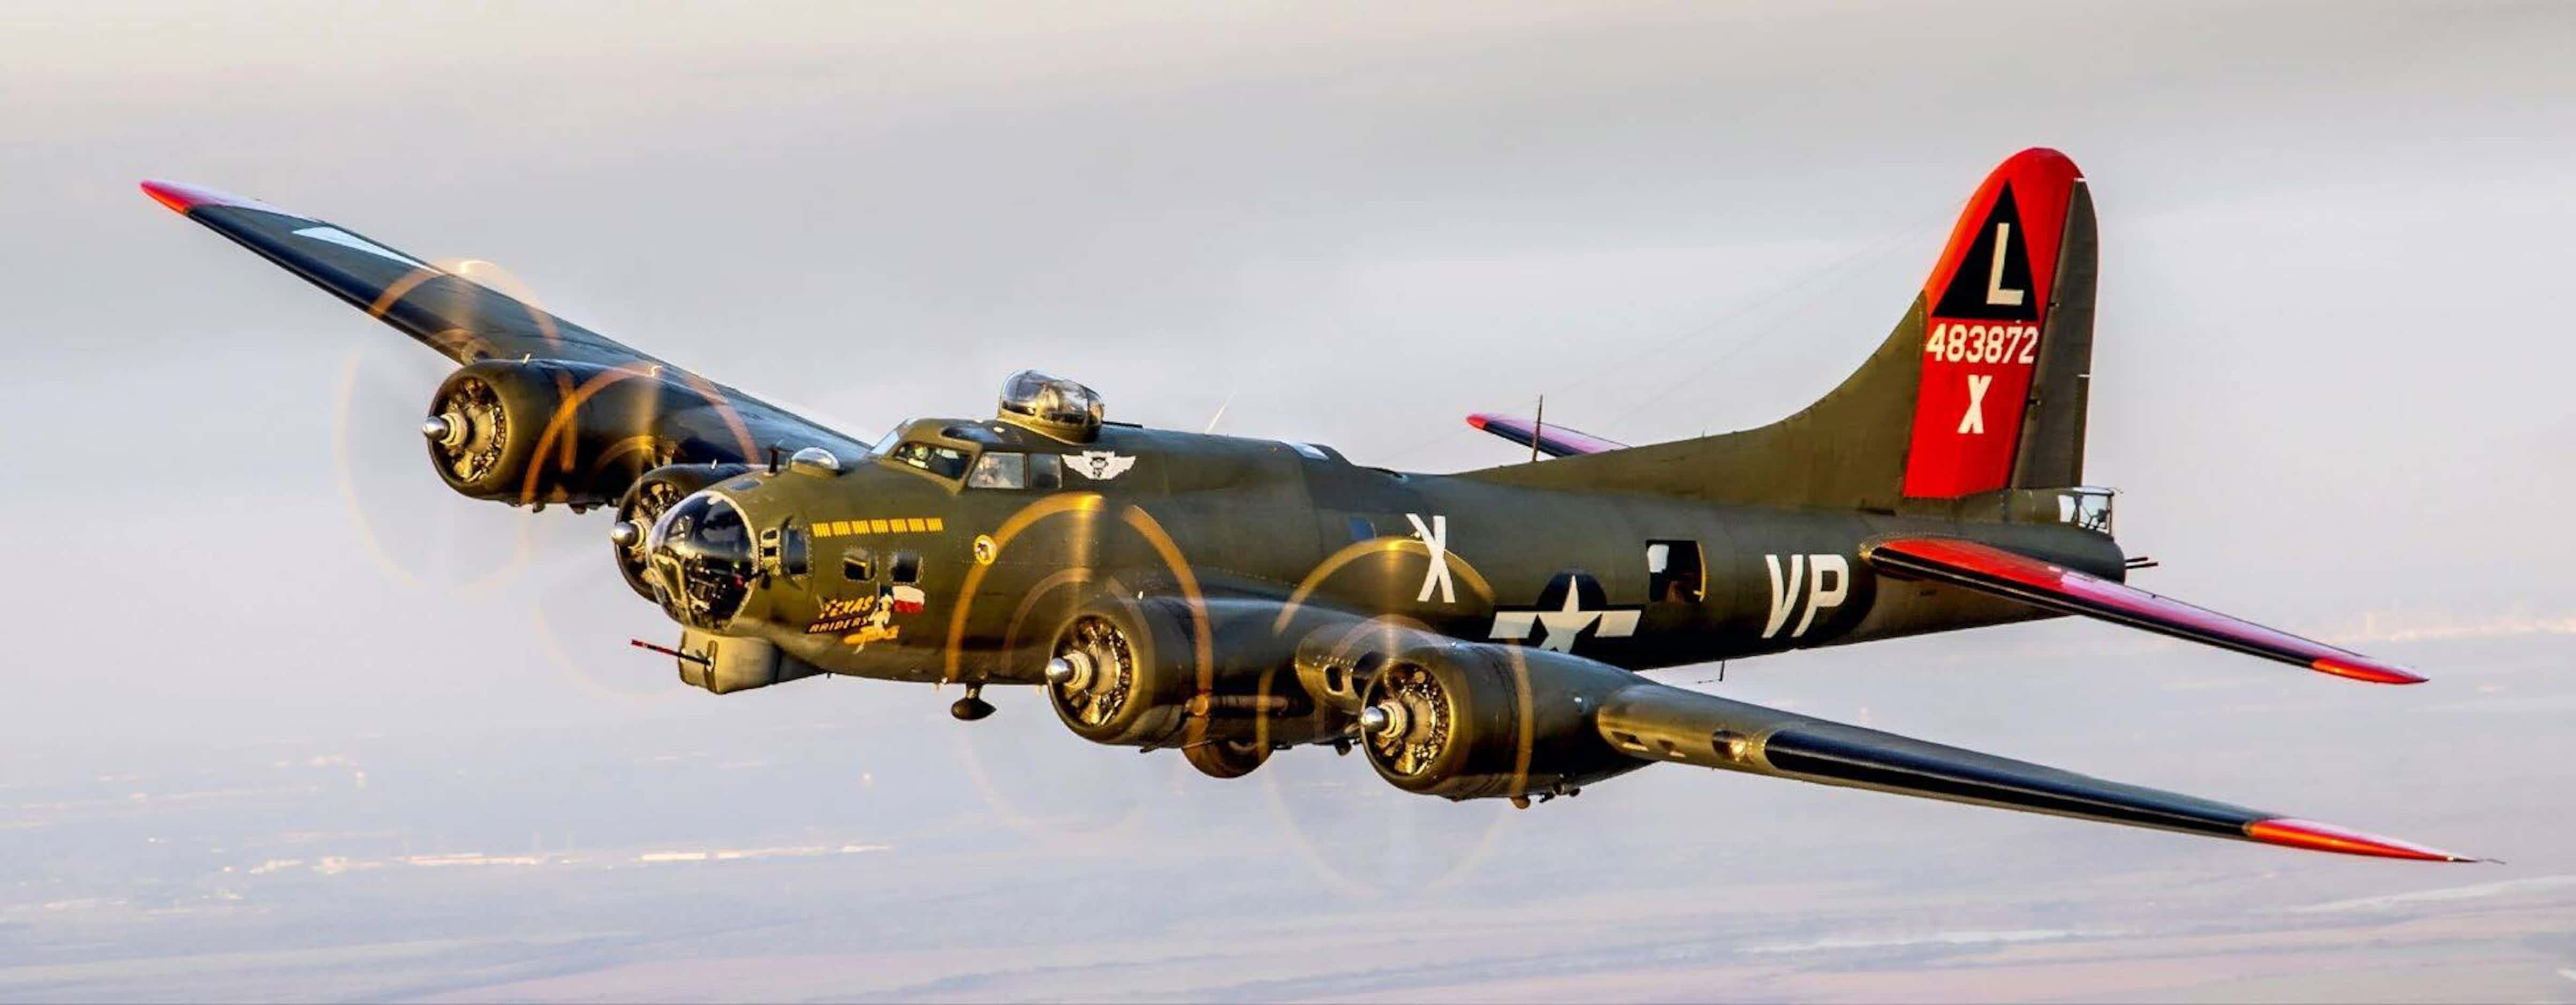 This image released by the National Transportation Safety Board shows the Boeing B-17 Flying...